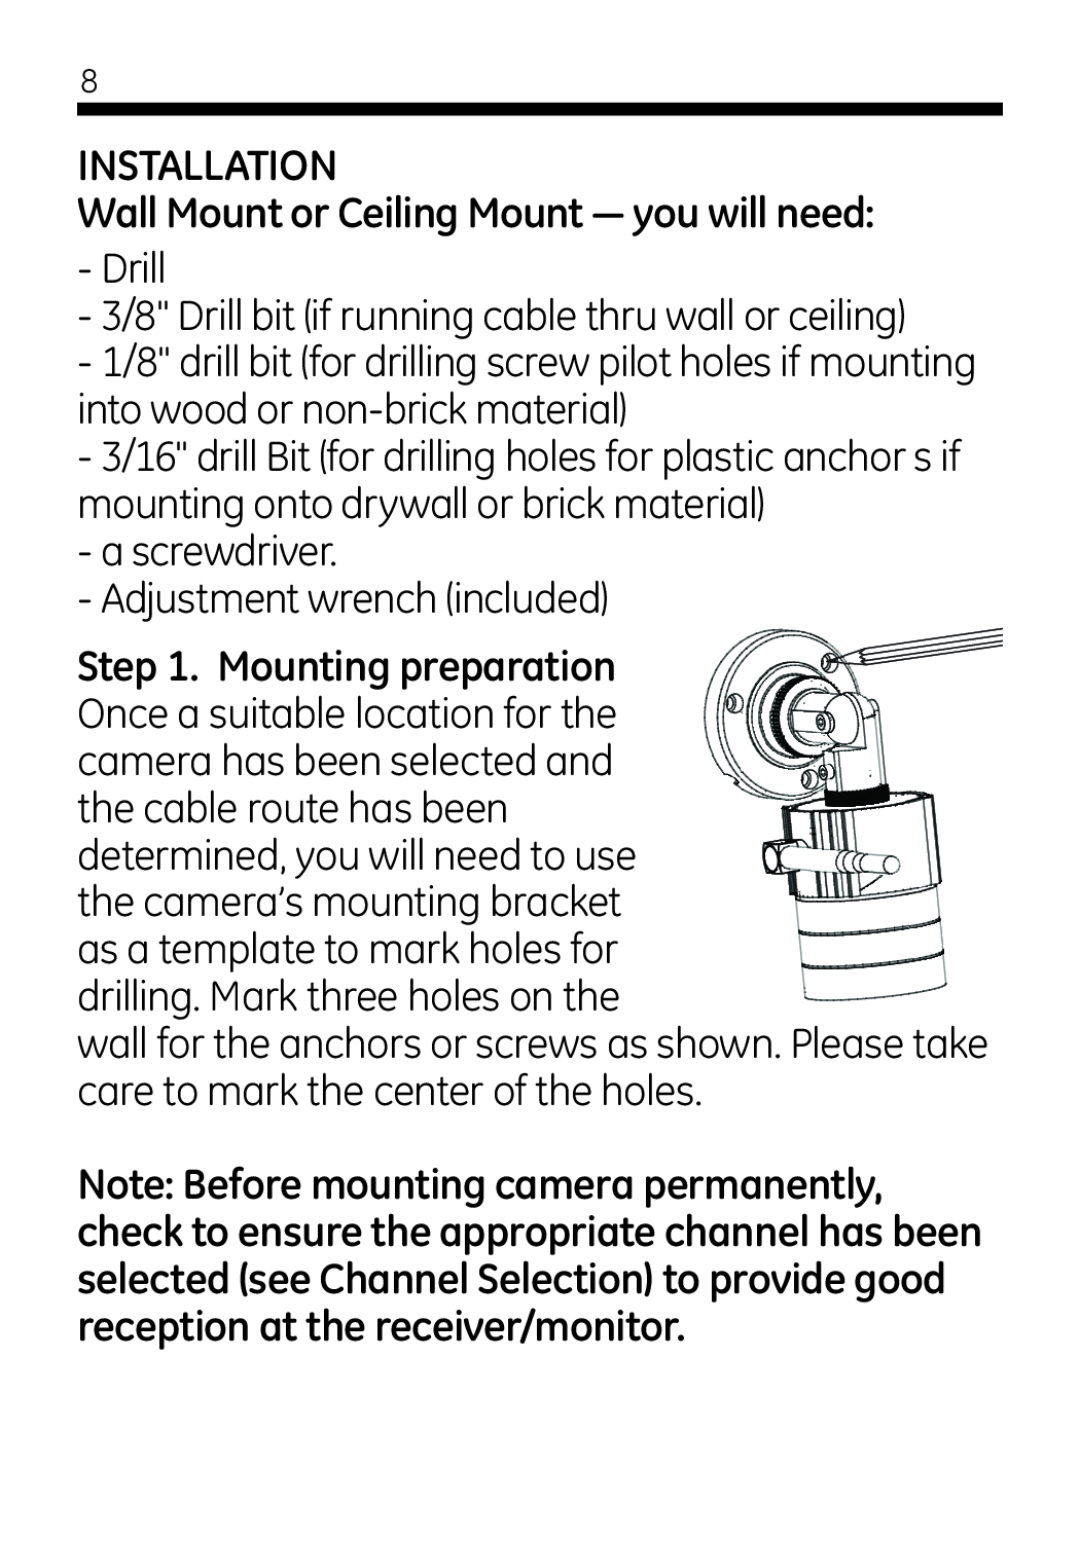 Jasco 45245 user manual Installation, Wall Mount or Ceiling Mount - you will need 